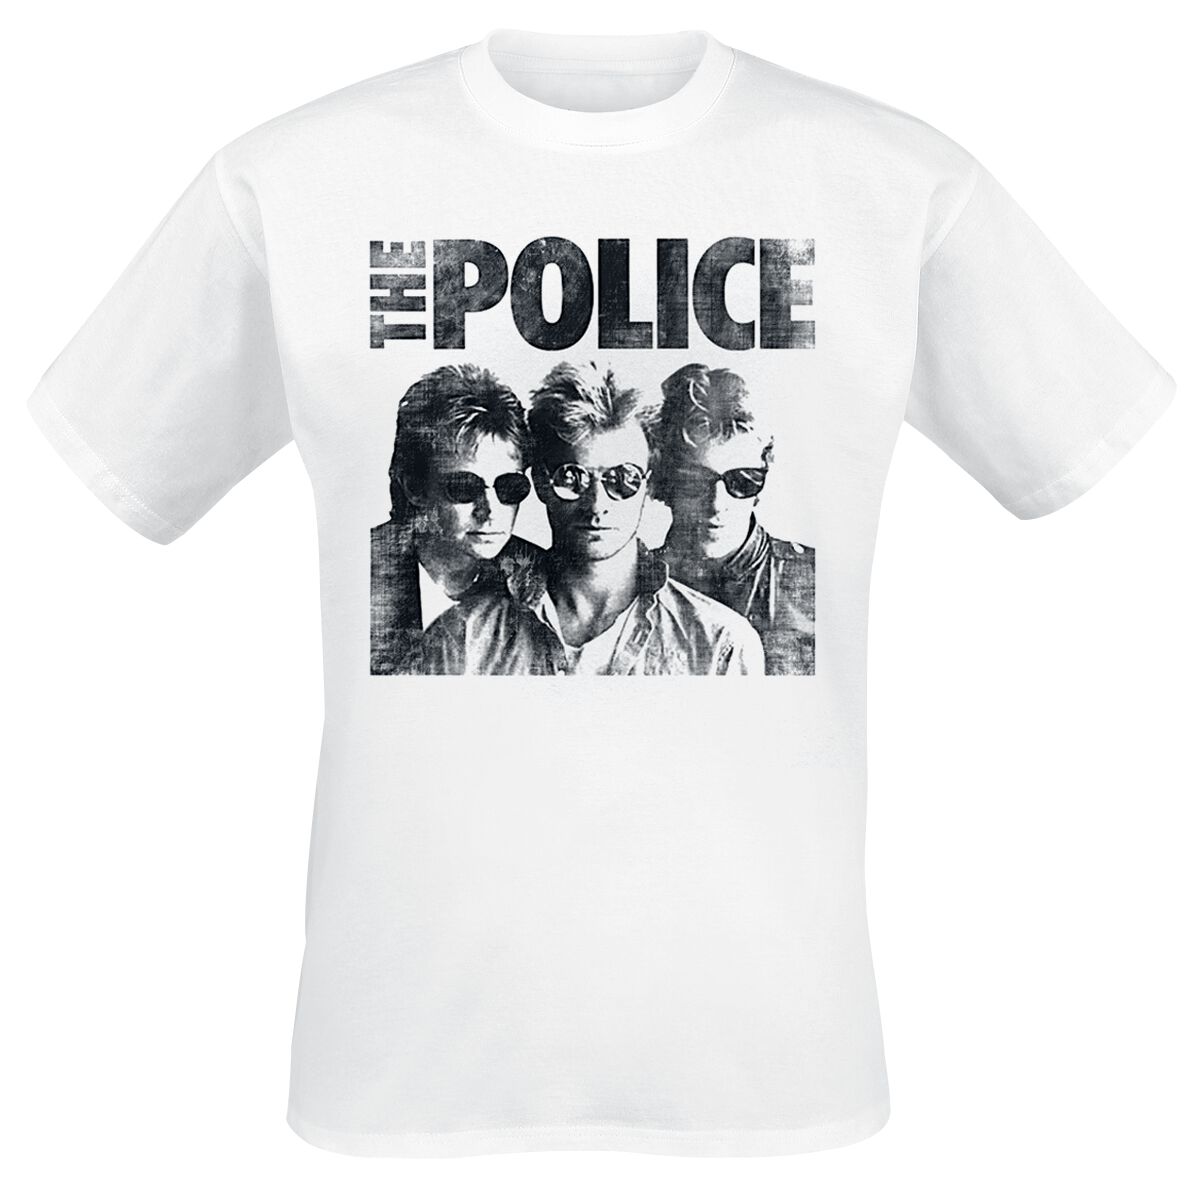 The Police Greatest Hits Cover T-Shirt white